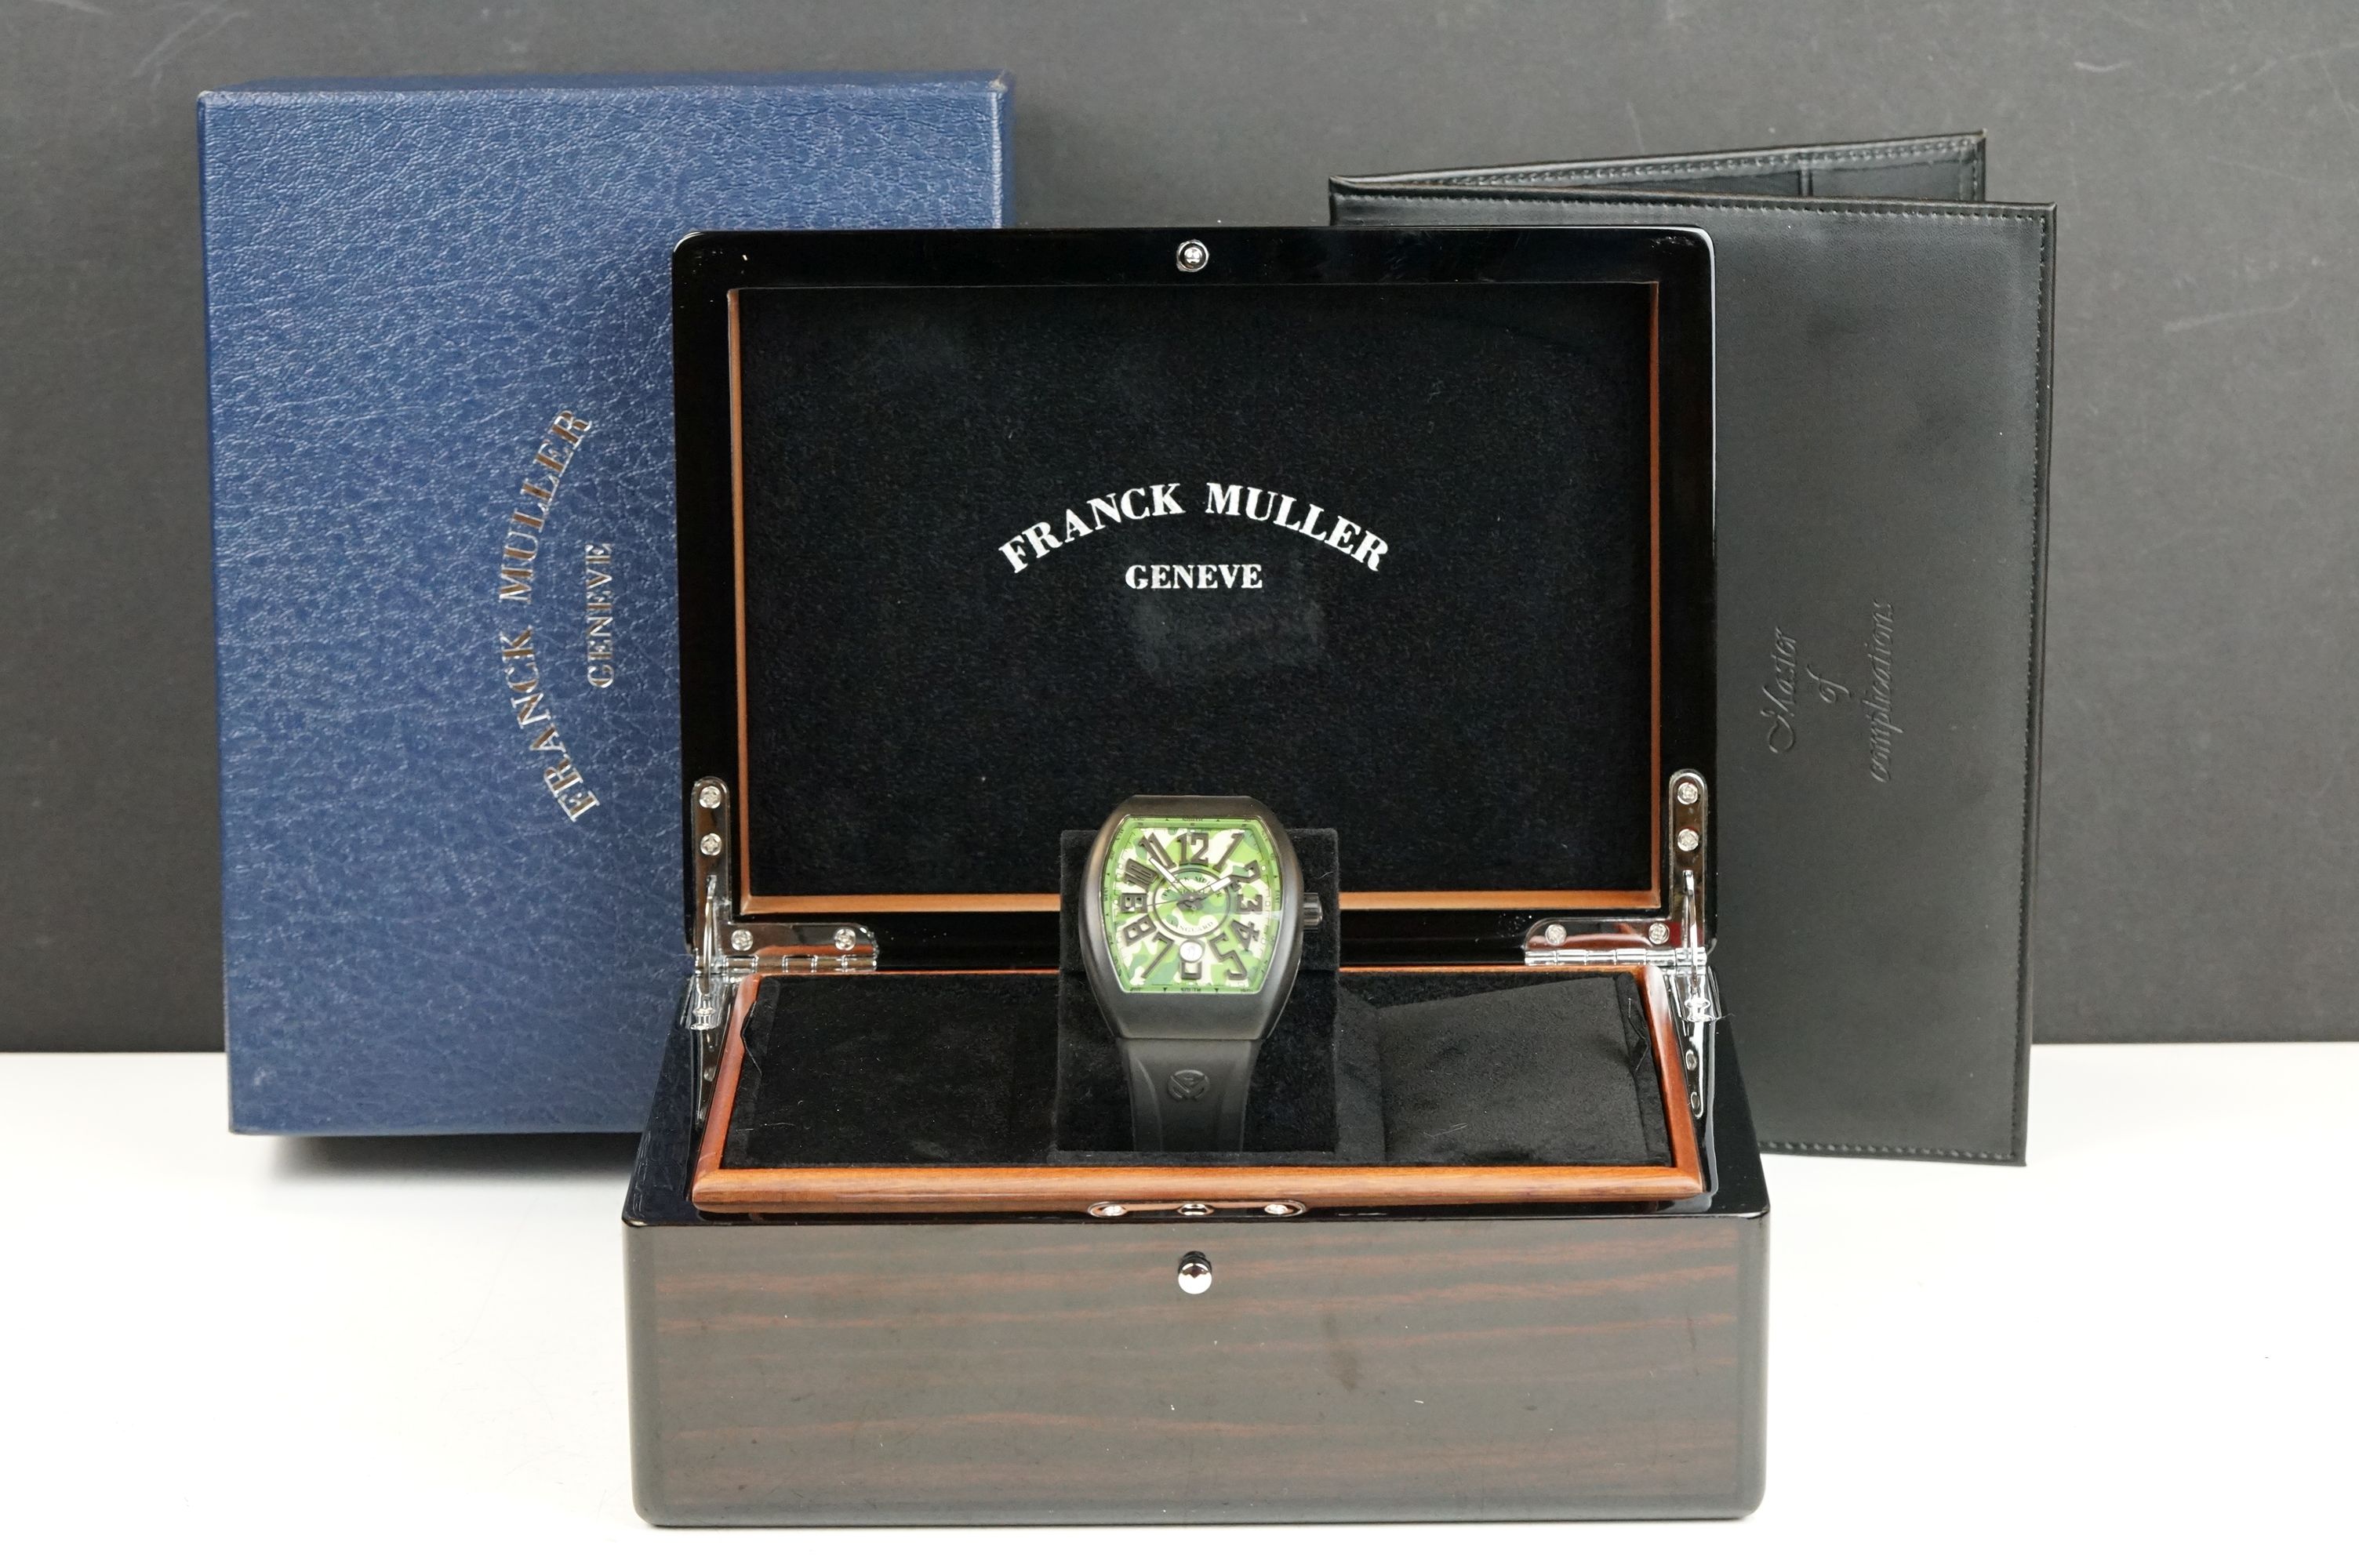 A Franck Muller Geneve 'Camouflage' wrstwatch, black case with black rubber strap, camourflage dial